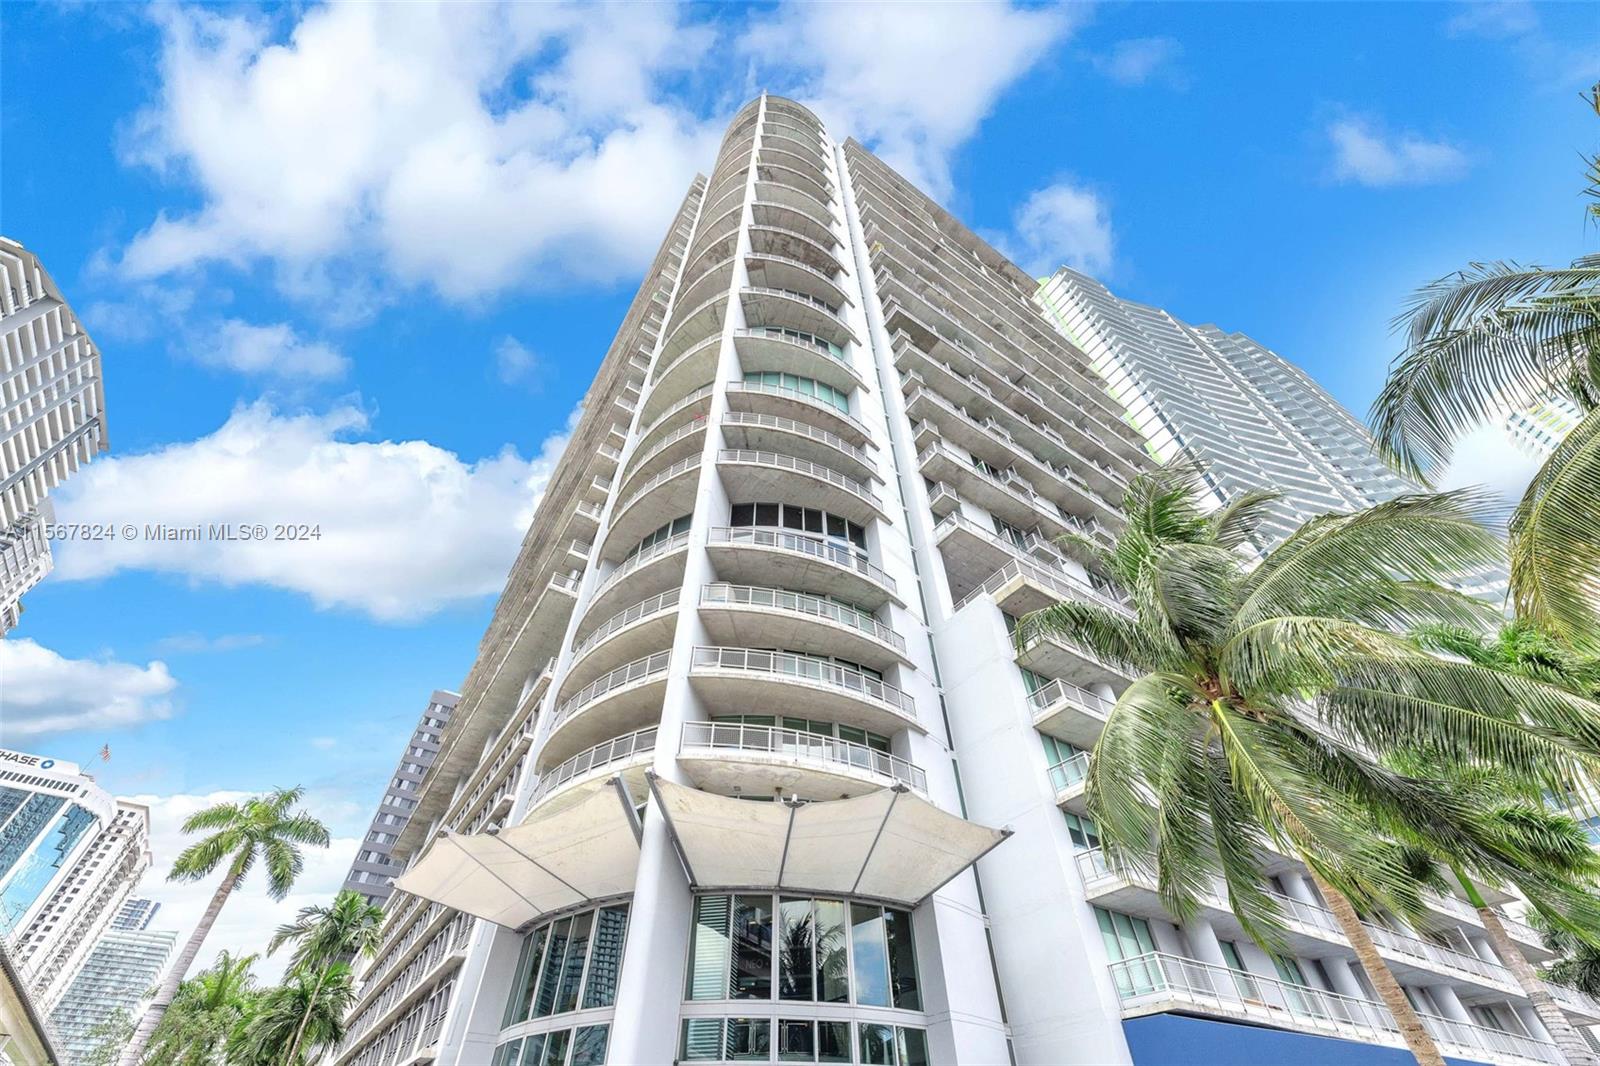 Loft style condo unit in the heart of Brickell with amazing views of the Brickell skyline and Miami River.  This unit is a 5 minute walk from the Brickell City Centre and is also located on the Miami River and the Miami Underline walkway. Brand new ceramic tile has been laid throughout the unit and it has been recently painted. 1 bedroom and 1 and a half bathrooms with washer and dryer and a parking space in covered and secure parking garage. Excellent amenities include a full gym, pool, dog park, recreation room, elegant lobby, and valet parking for guests.